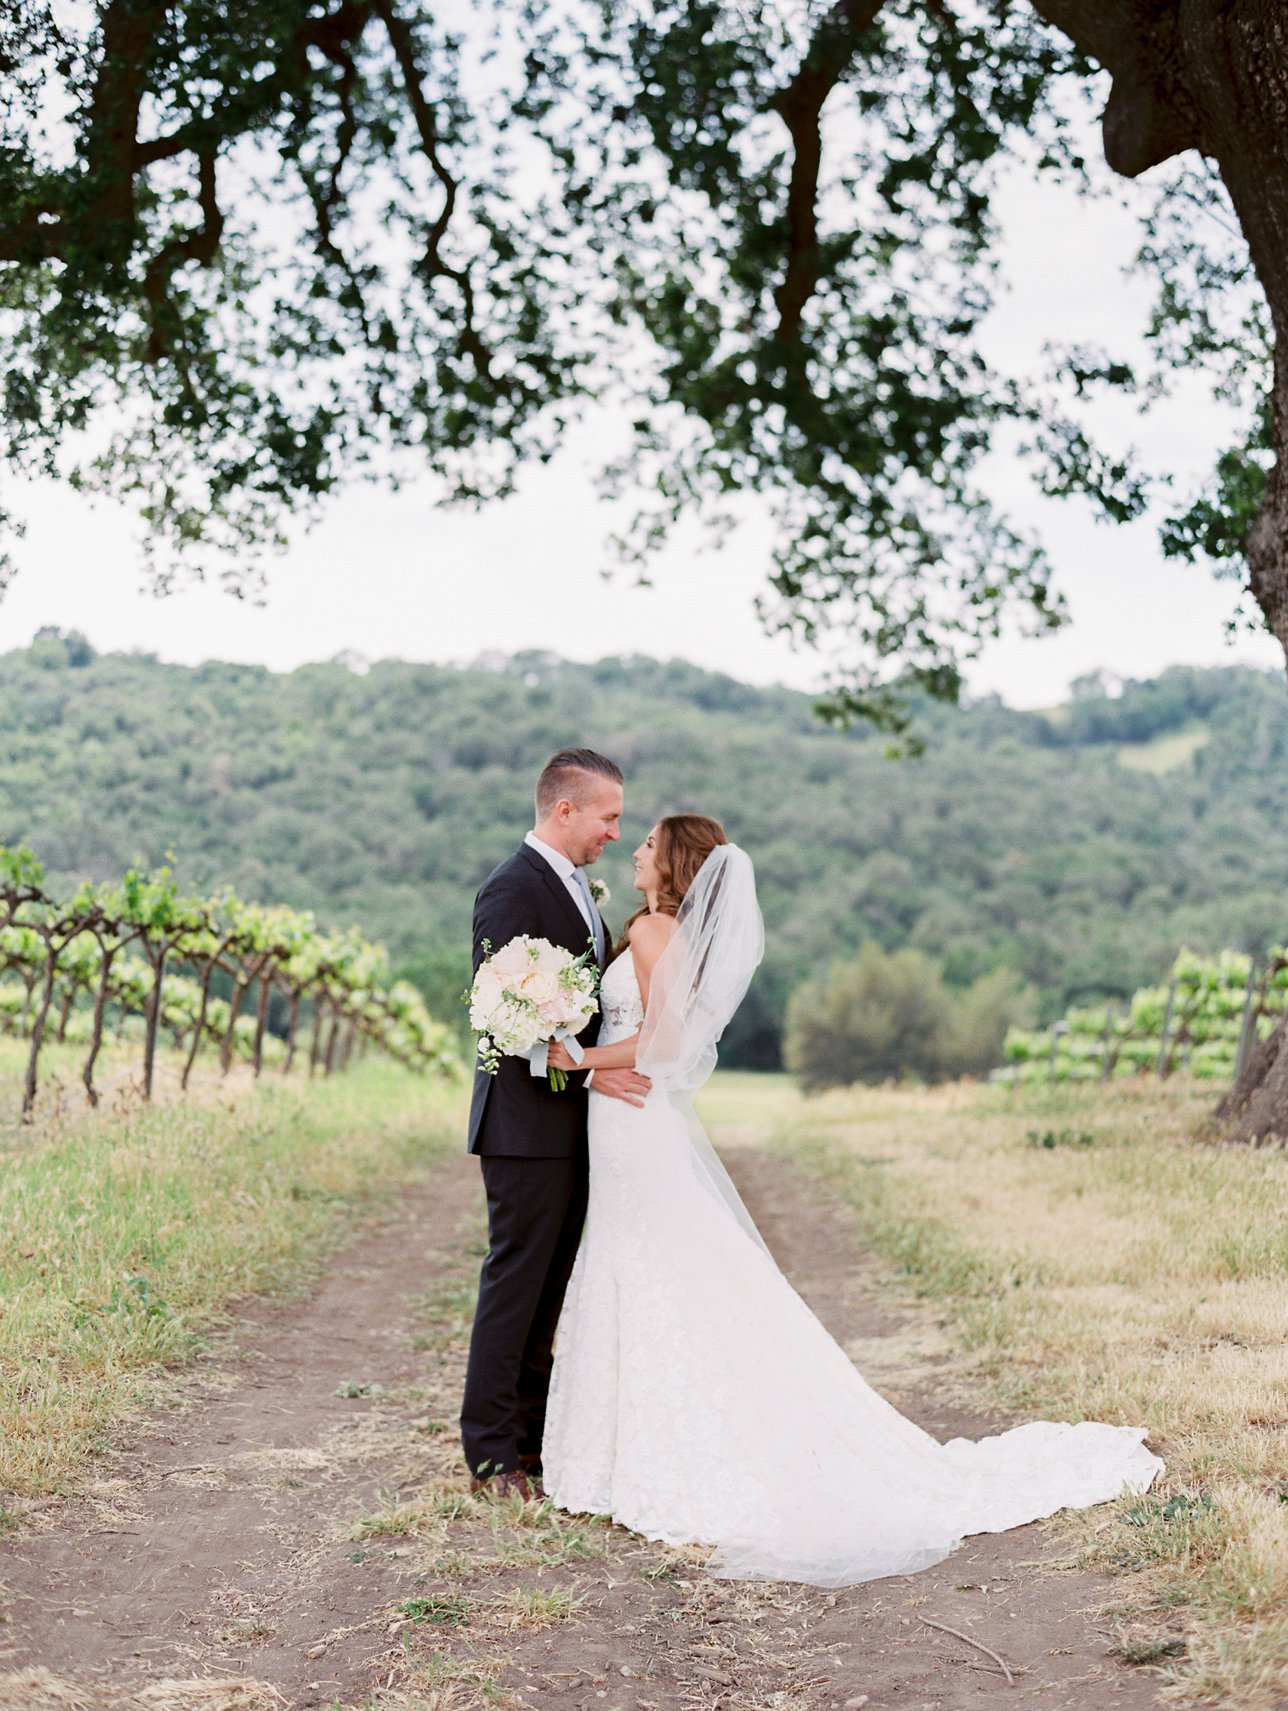 HammerSky Vineyards wedding photos - Paso Robles Wedding Photographer | Rachel Solomon Photography_9012